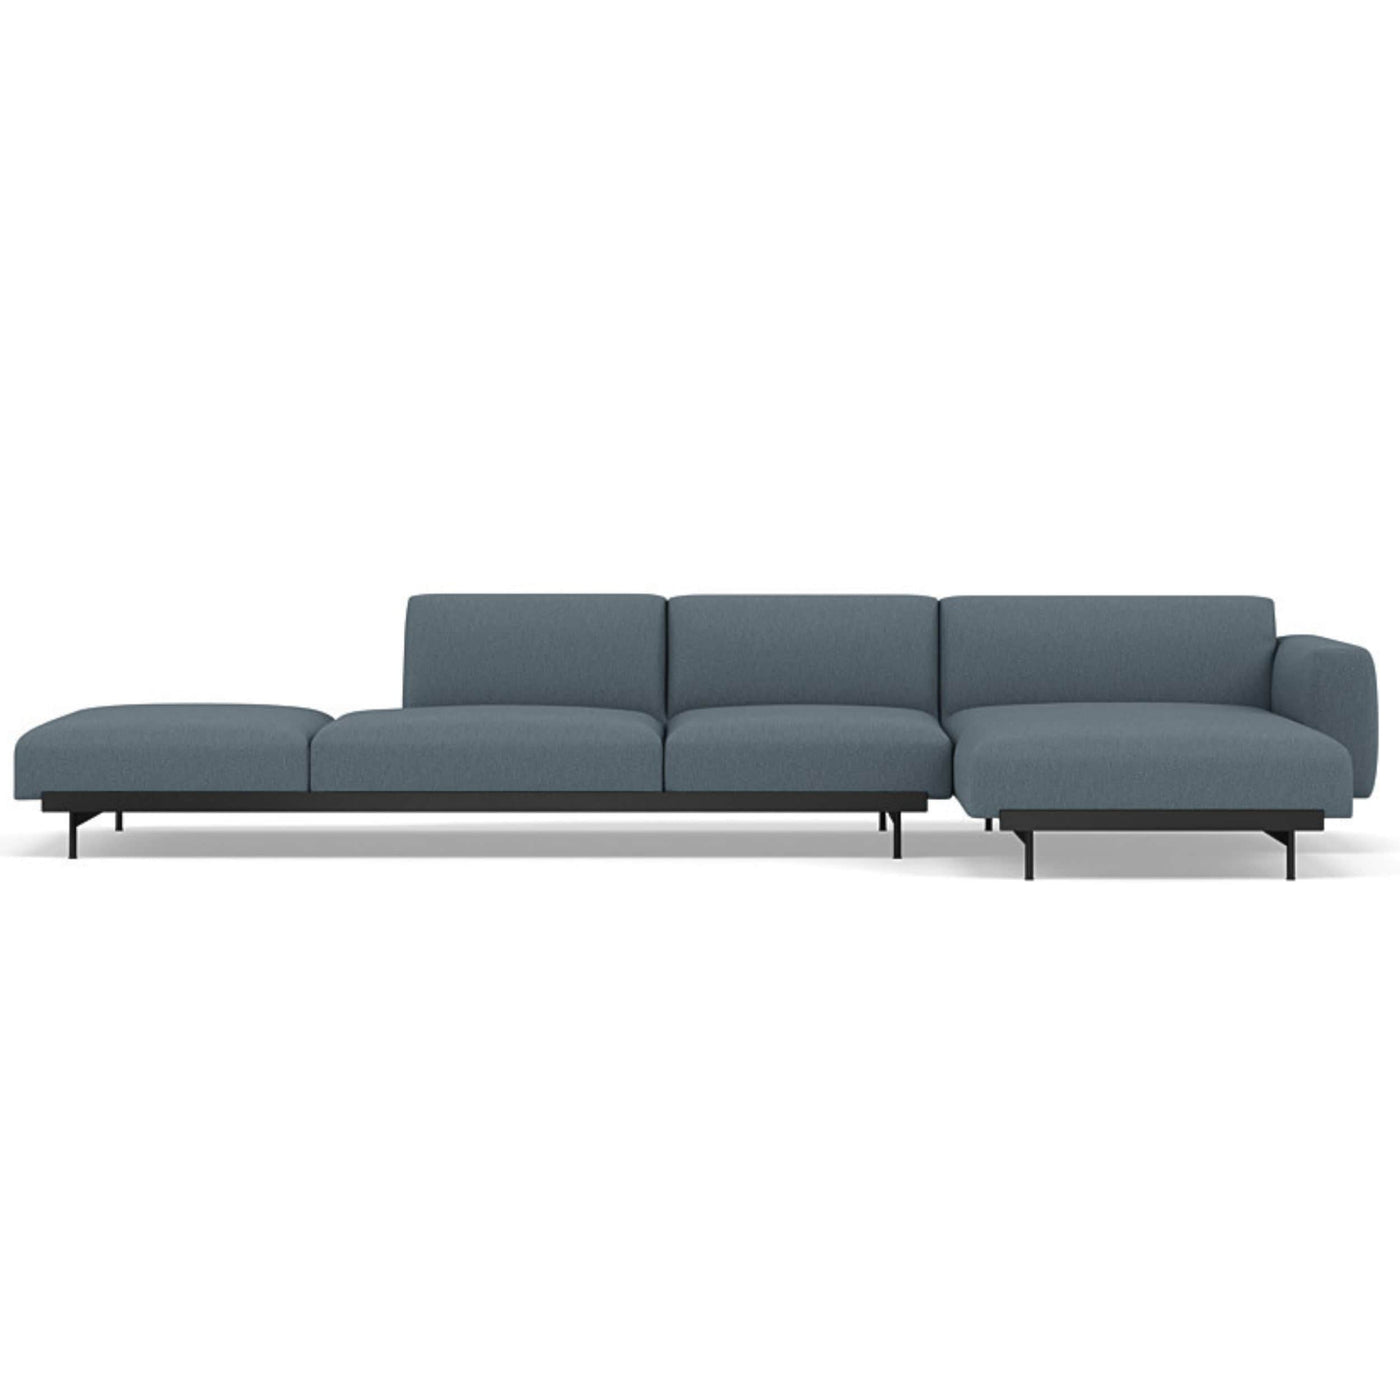 Muuto In Situ Modular 4 Seater Sofa configuration 4 in clay 1. Made to order from someday designs. #colour_clay-1-blue